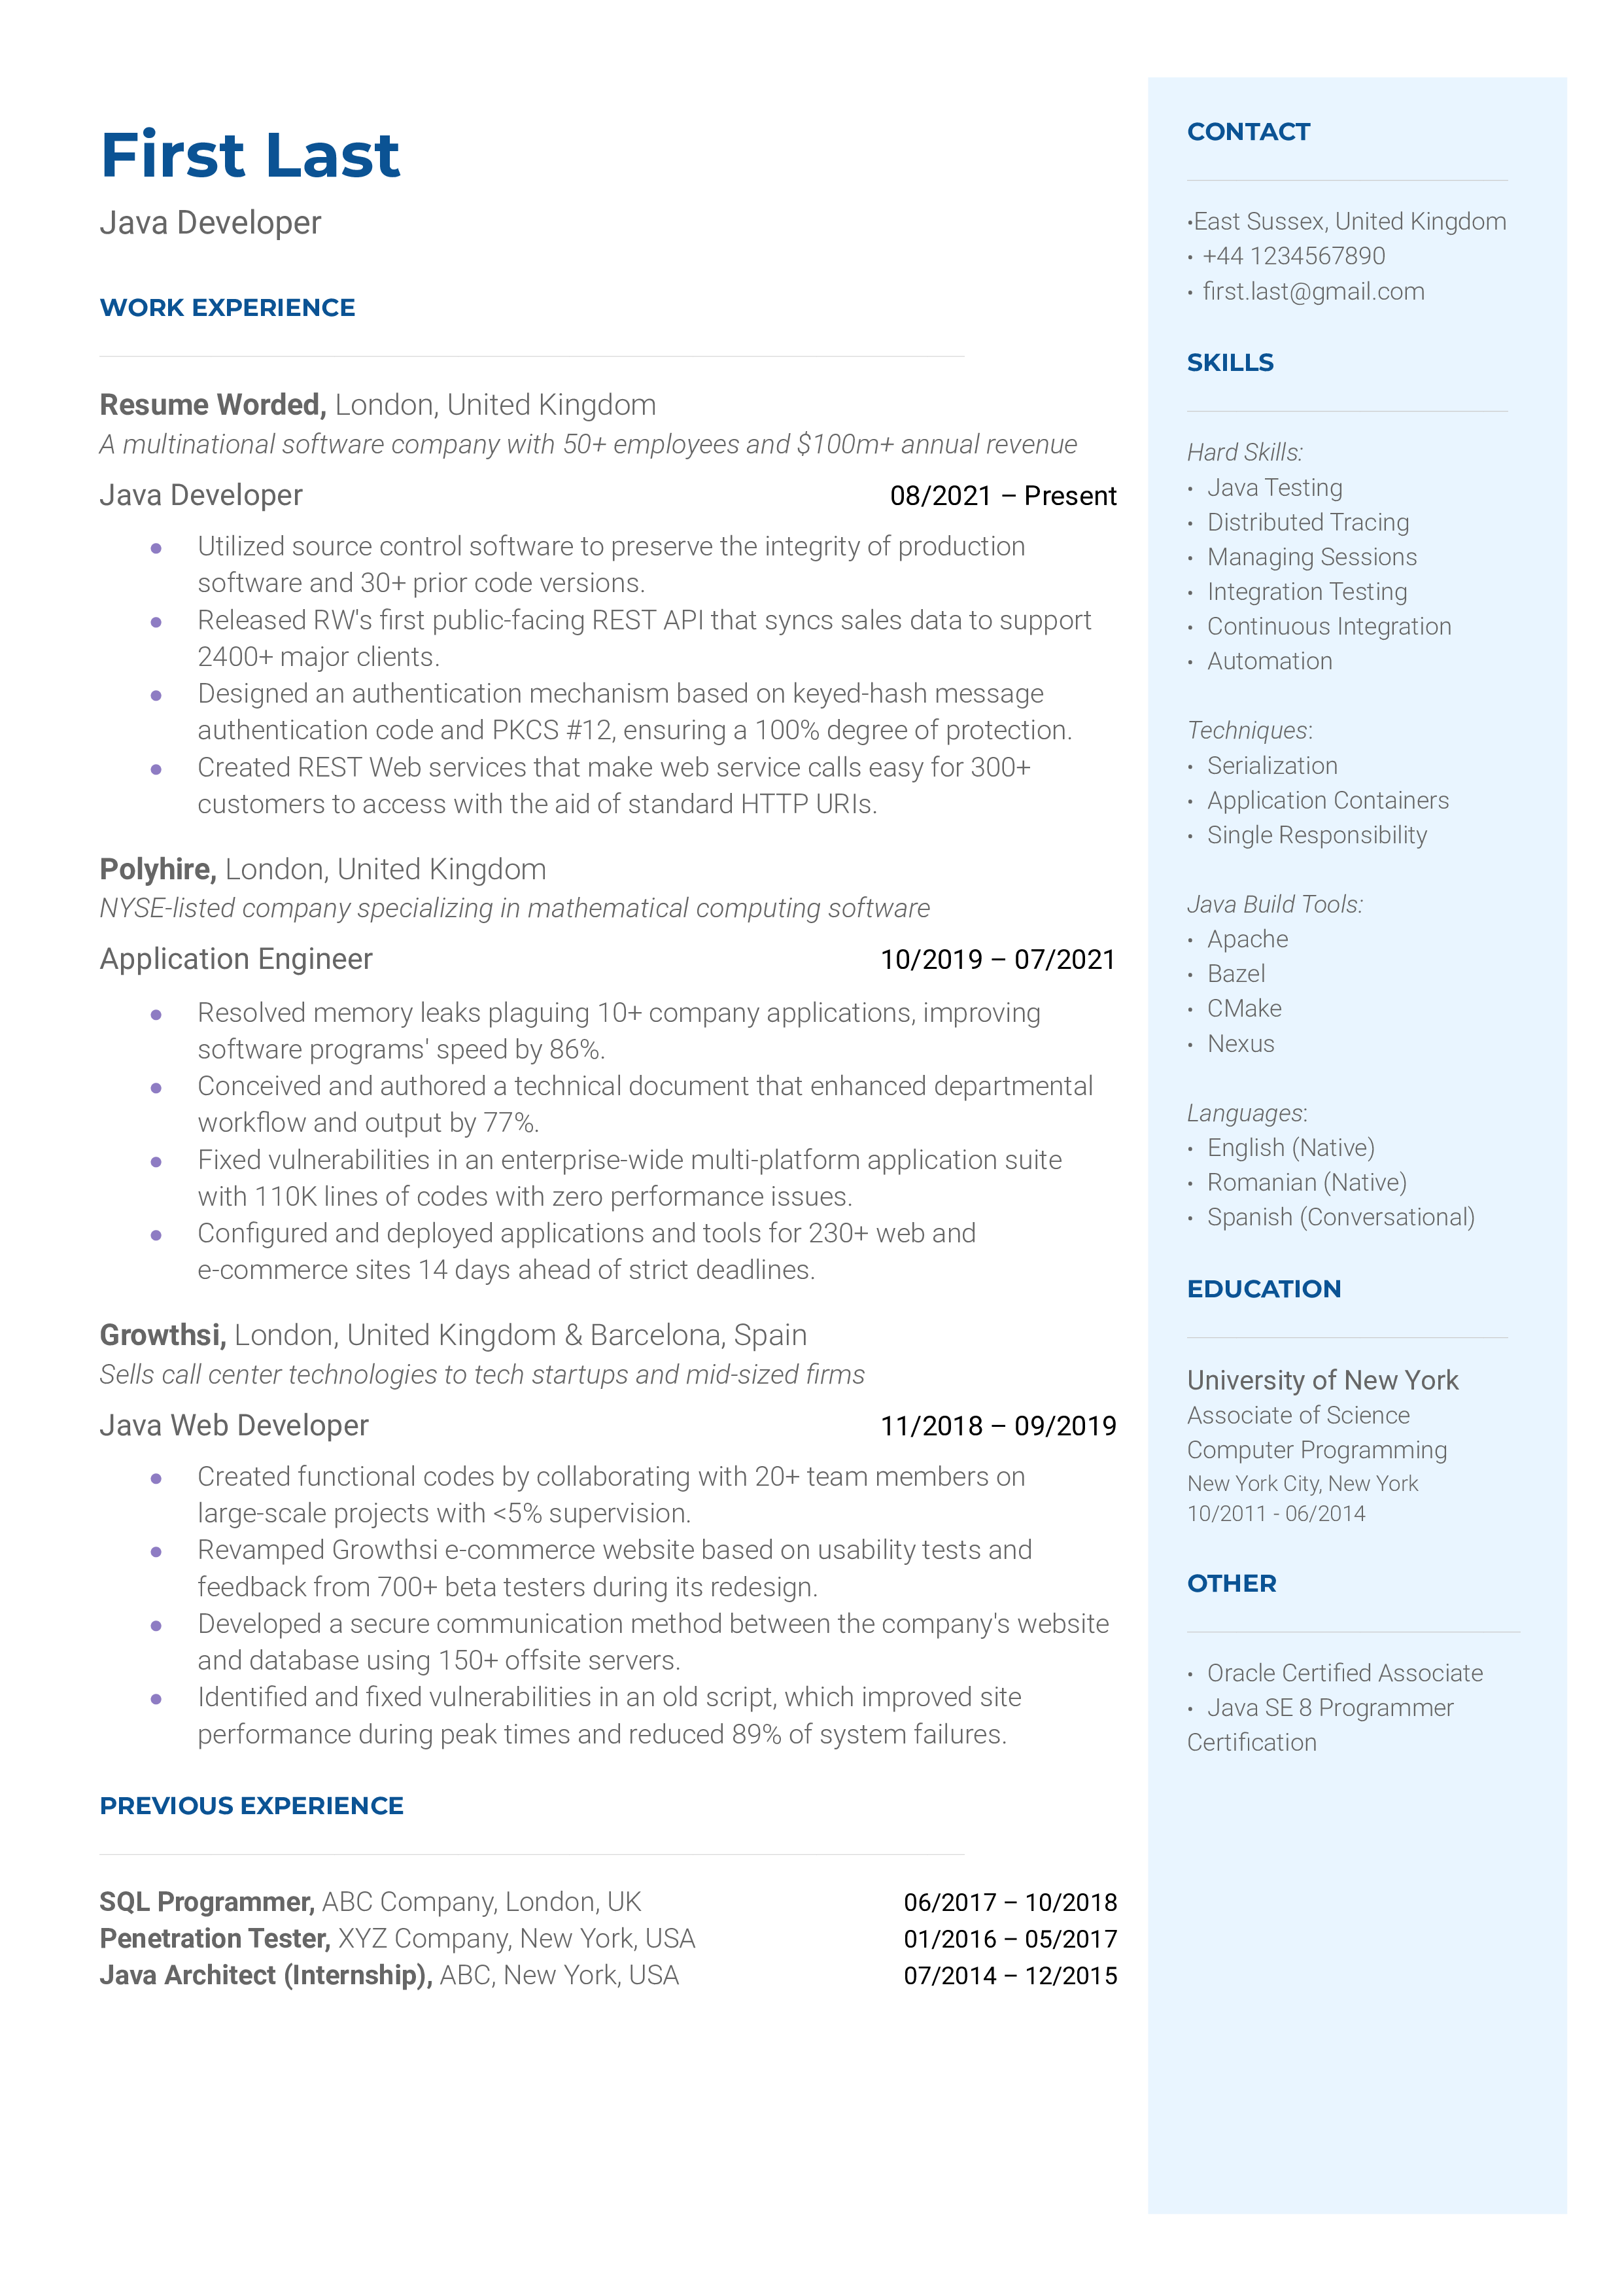 A resume for a java developer with a bachelor's degree and experience as a junior developer and software engineering intern.